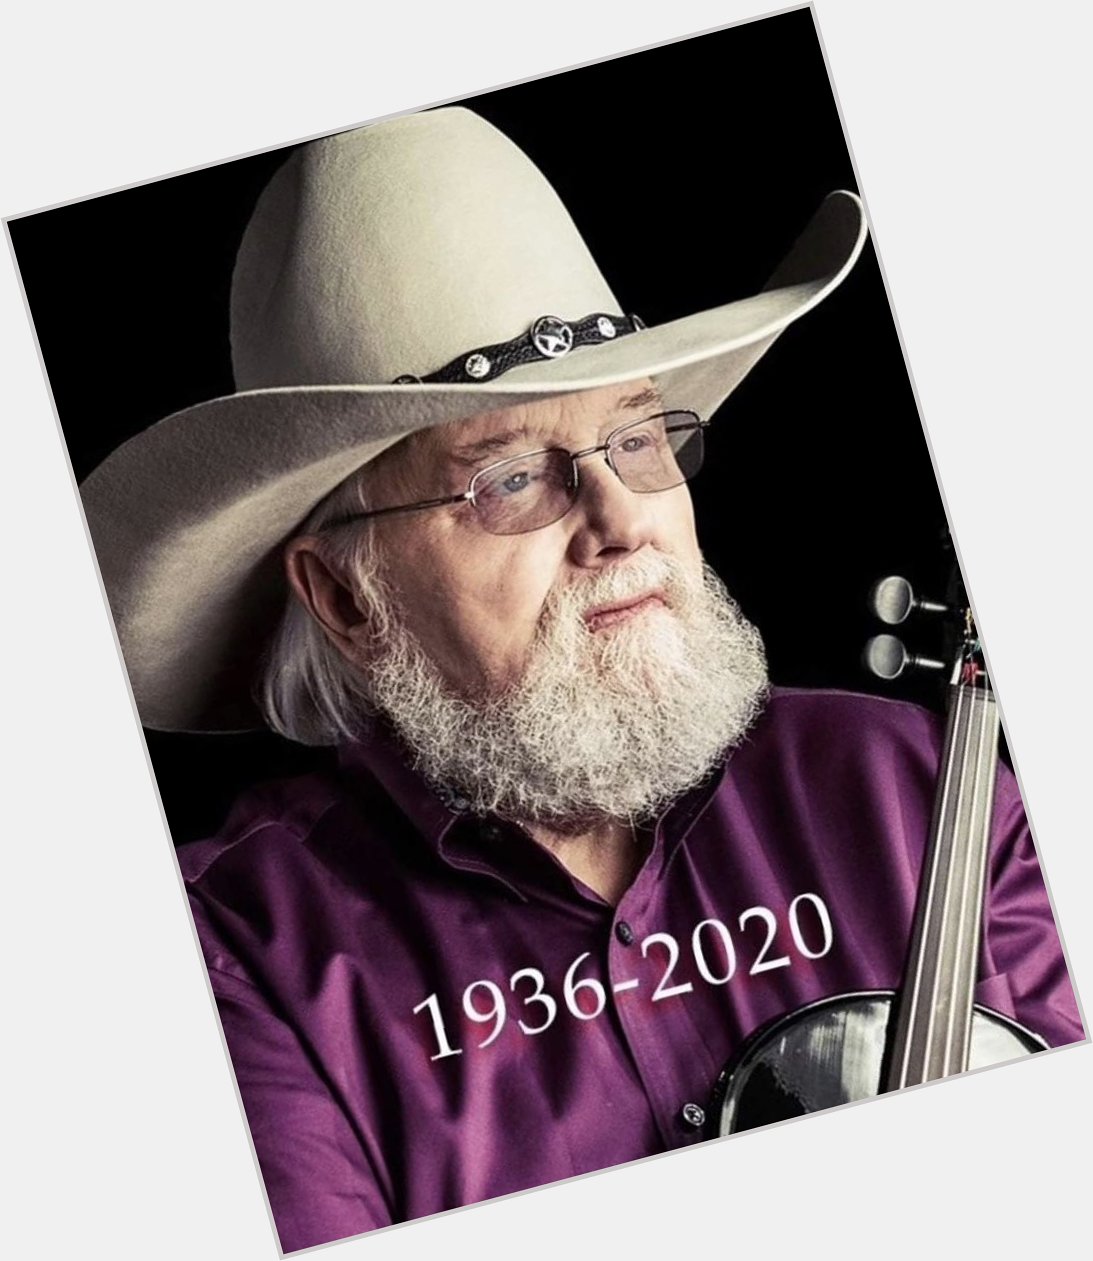 Happy Heavenly Birthday to my pal, Charlie Daniels. An icon, a legend, and a patriot.  